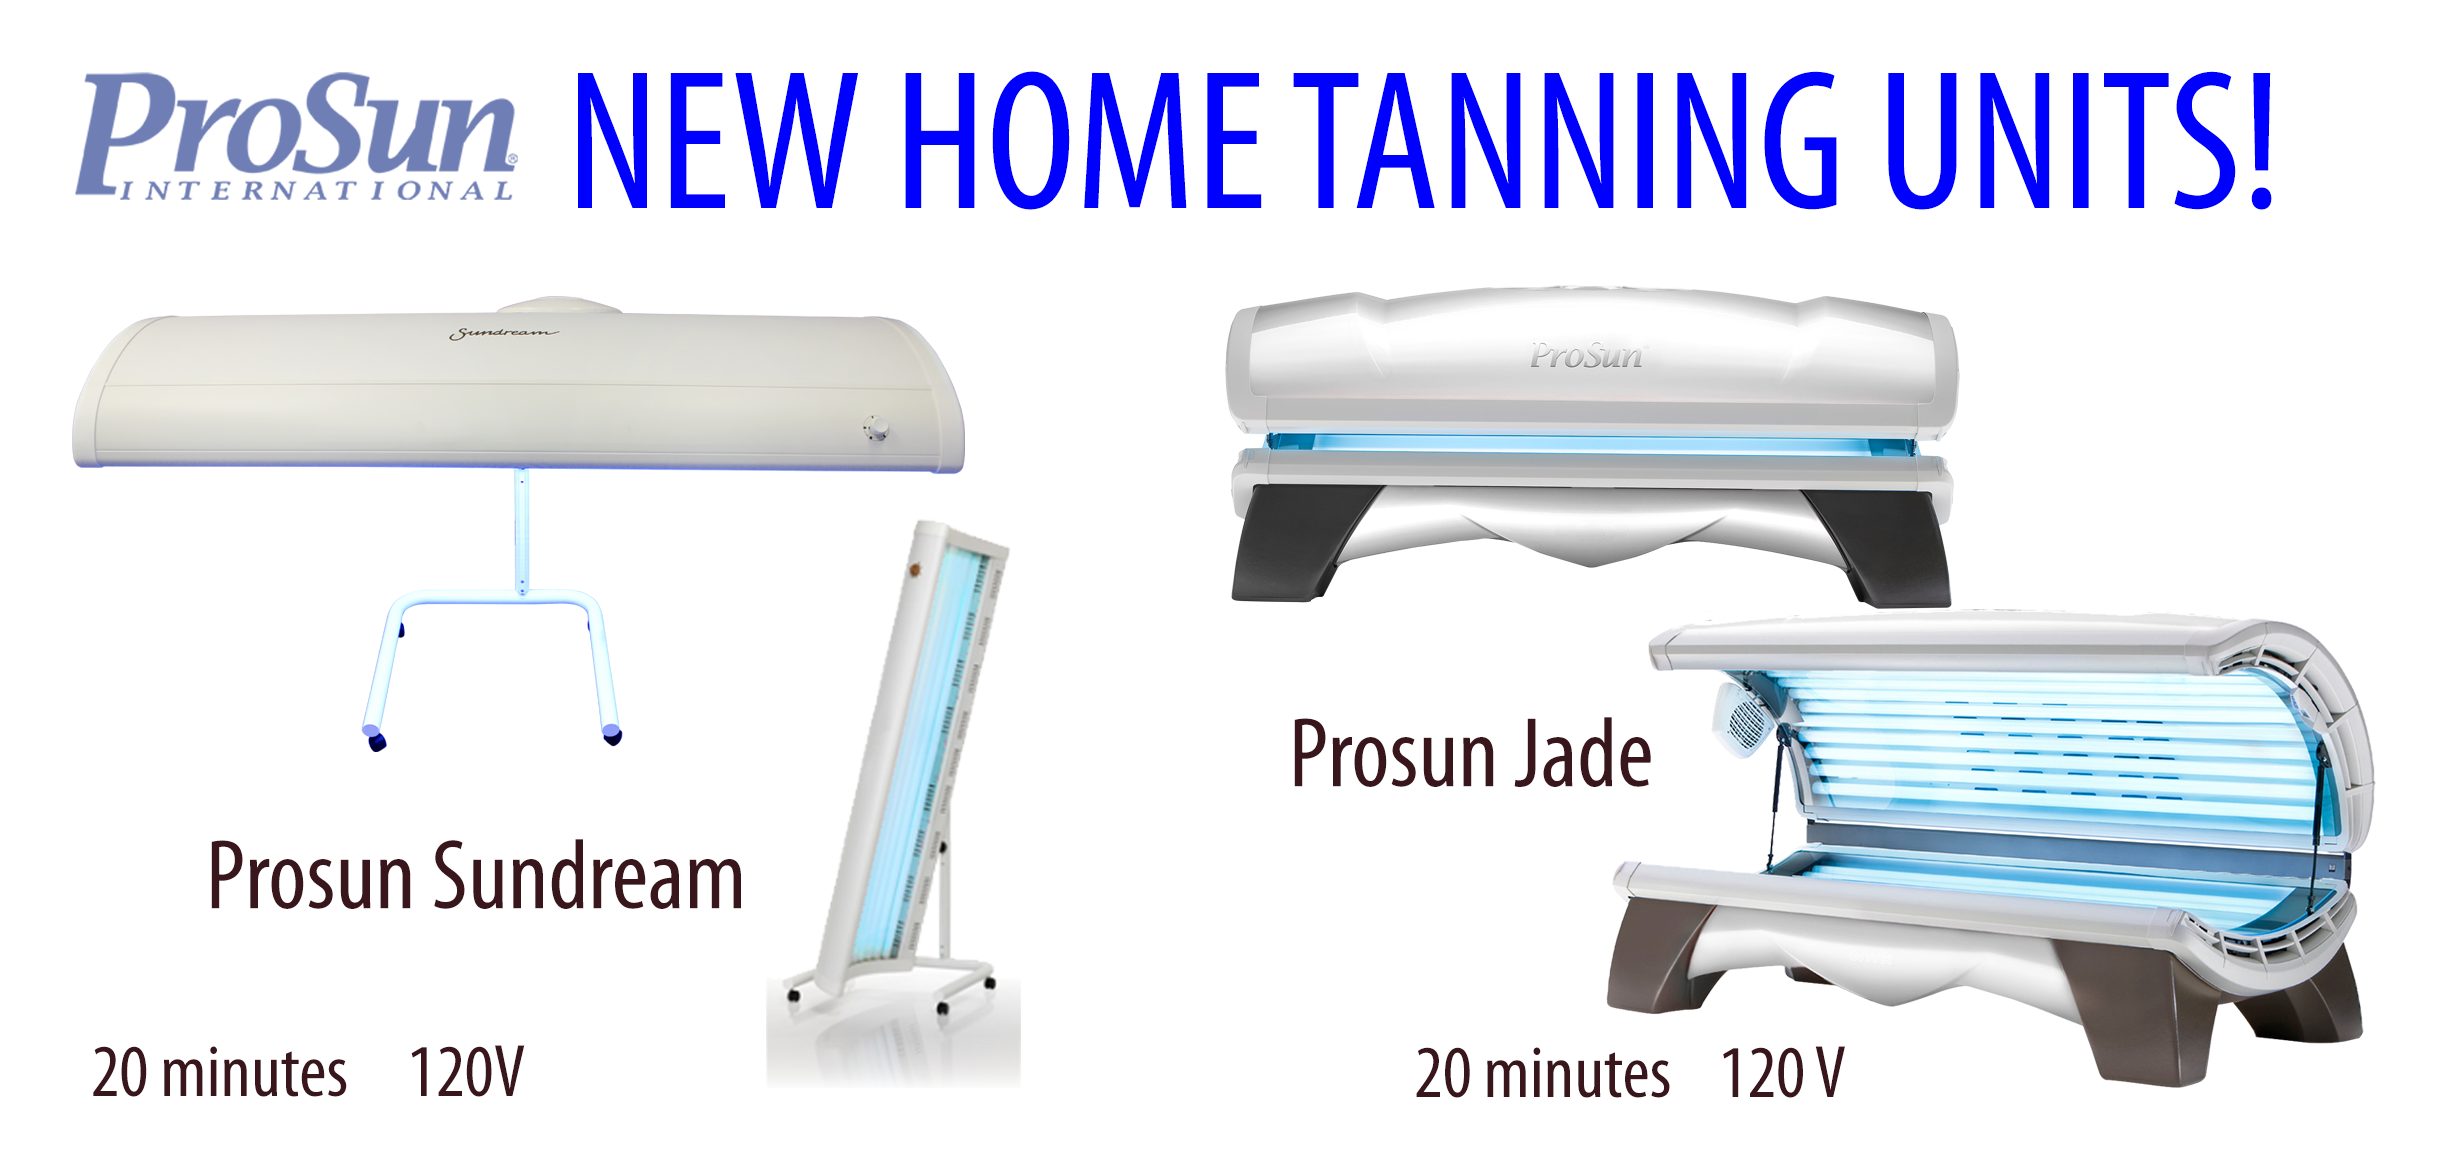 New home tanning beds